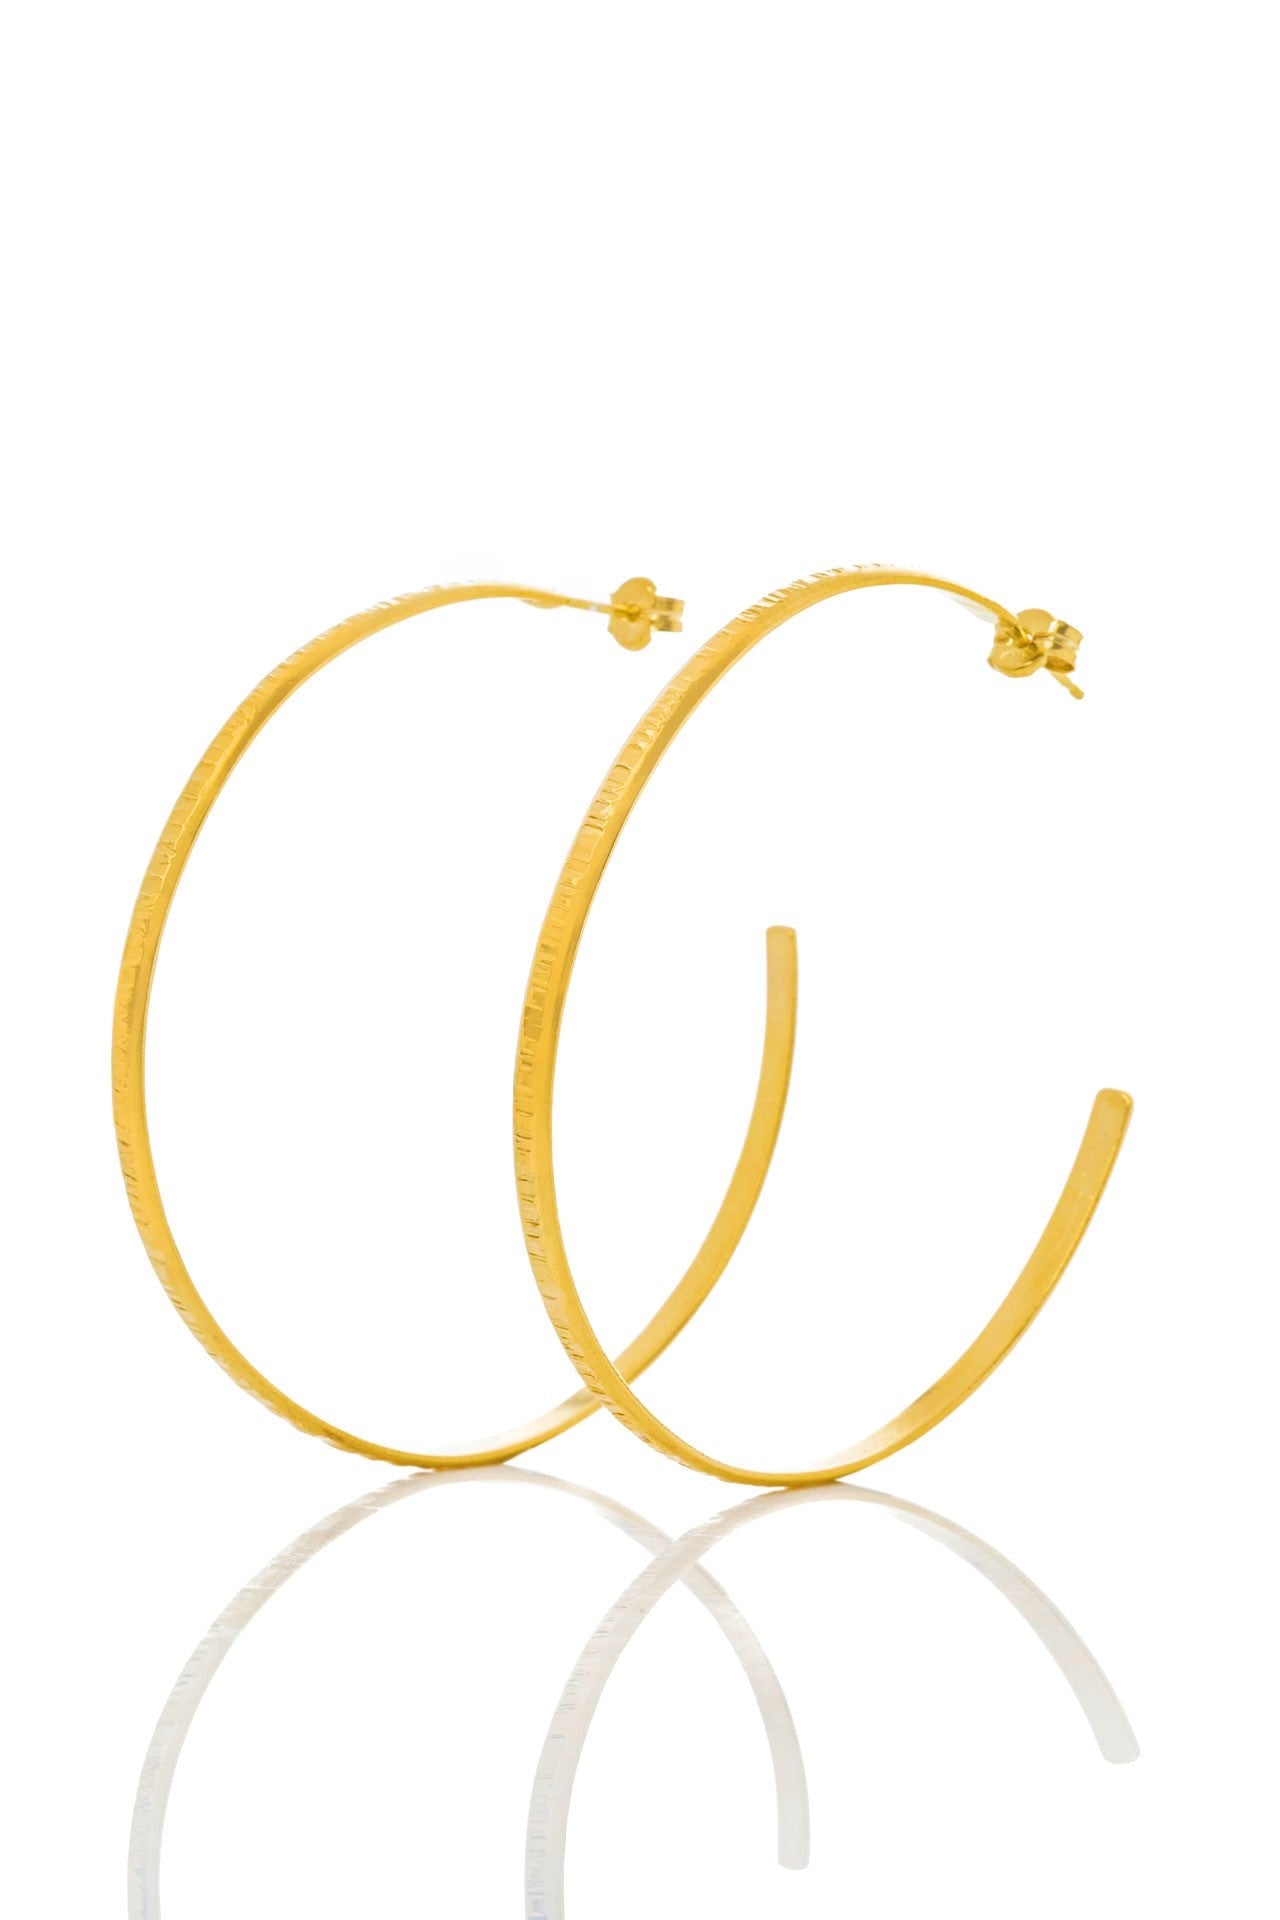 Cindy small hoops by Pearl Martini